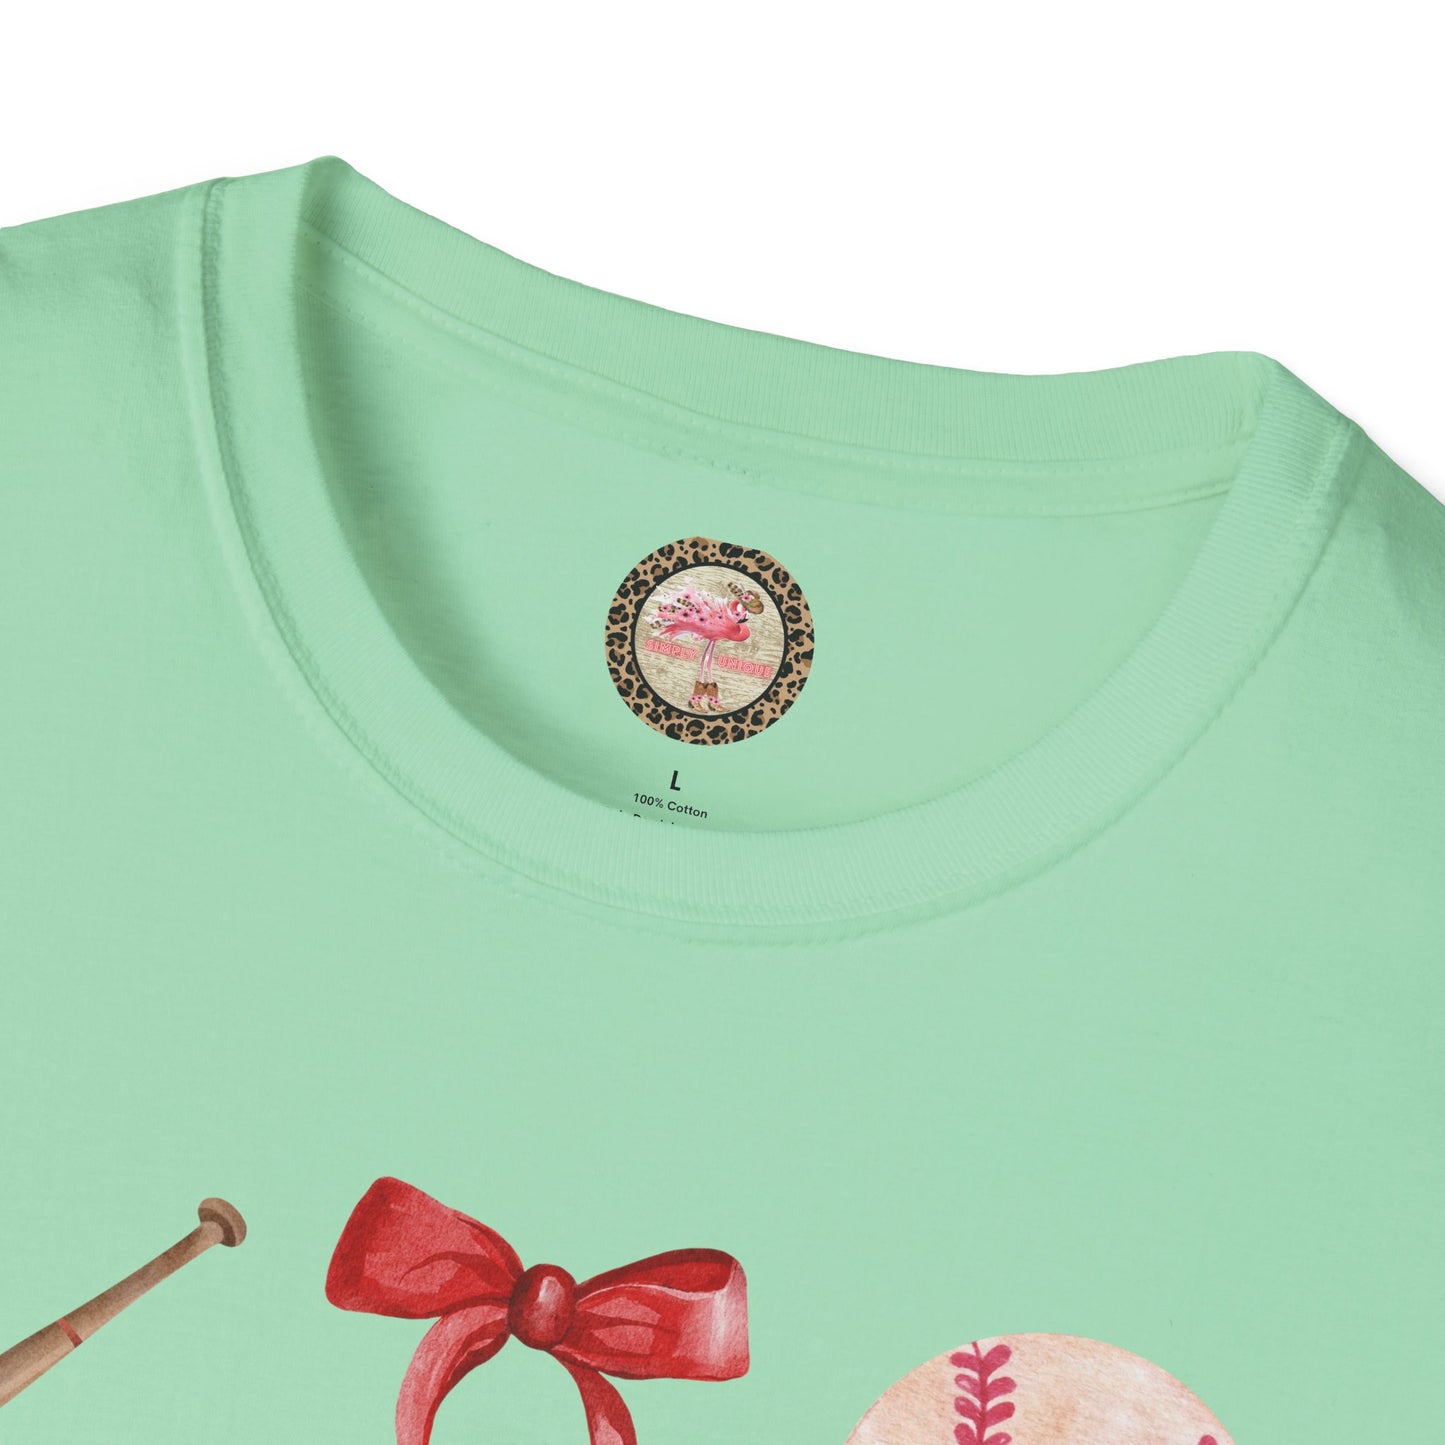 Baseball and bows design- great for Moms!!